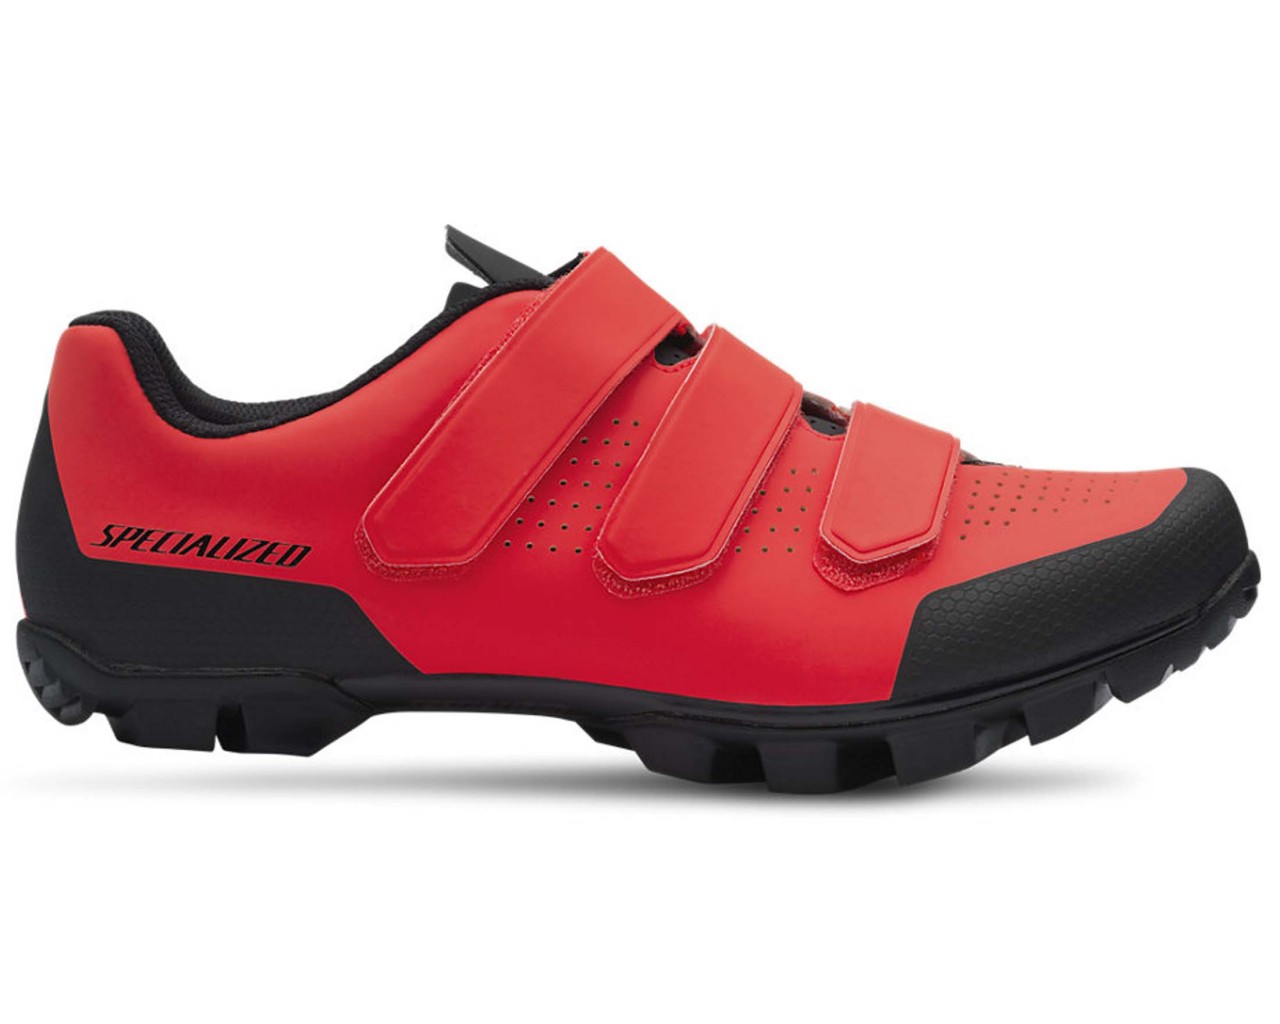 Specialized Sport MTB shoes | rocket red